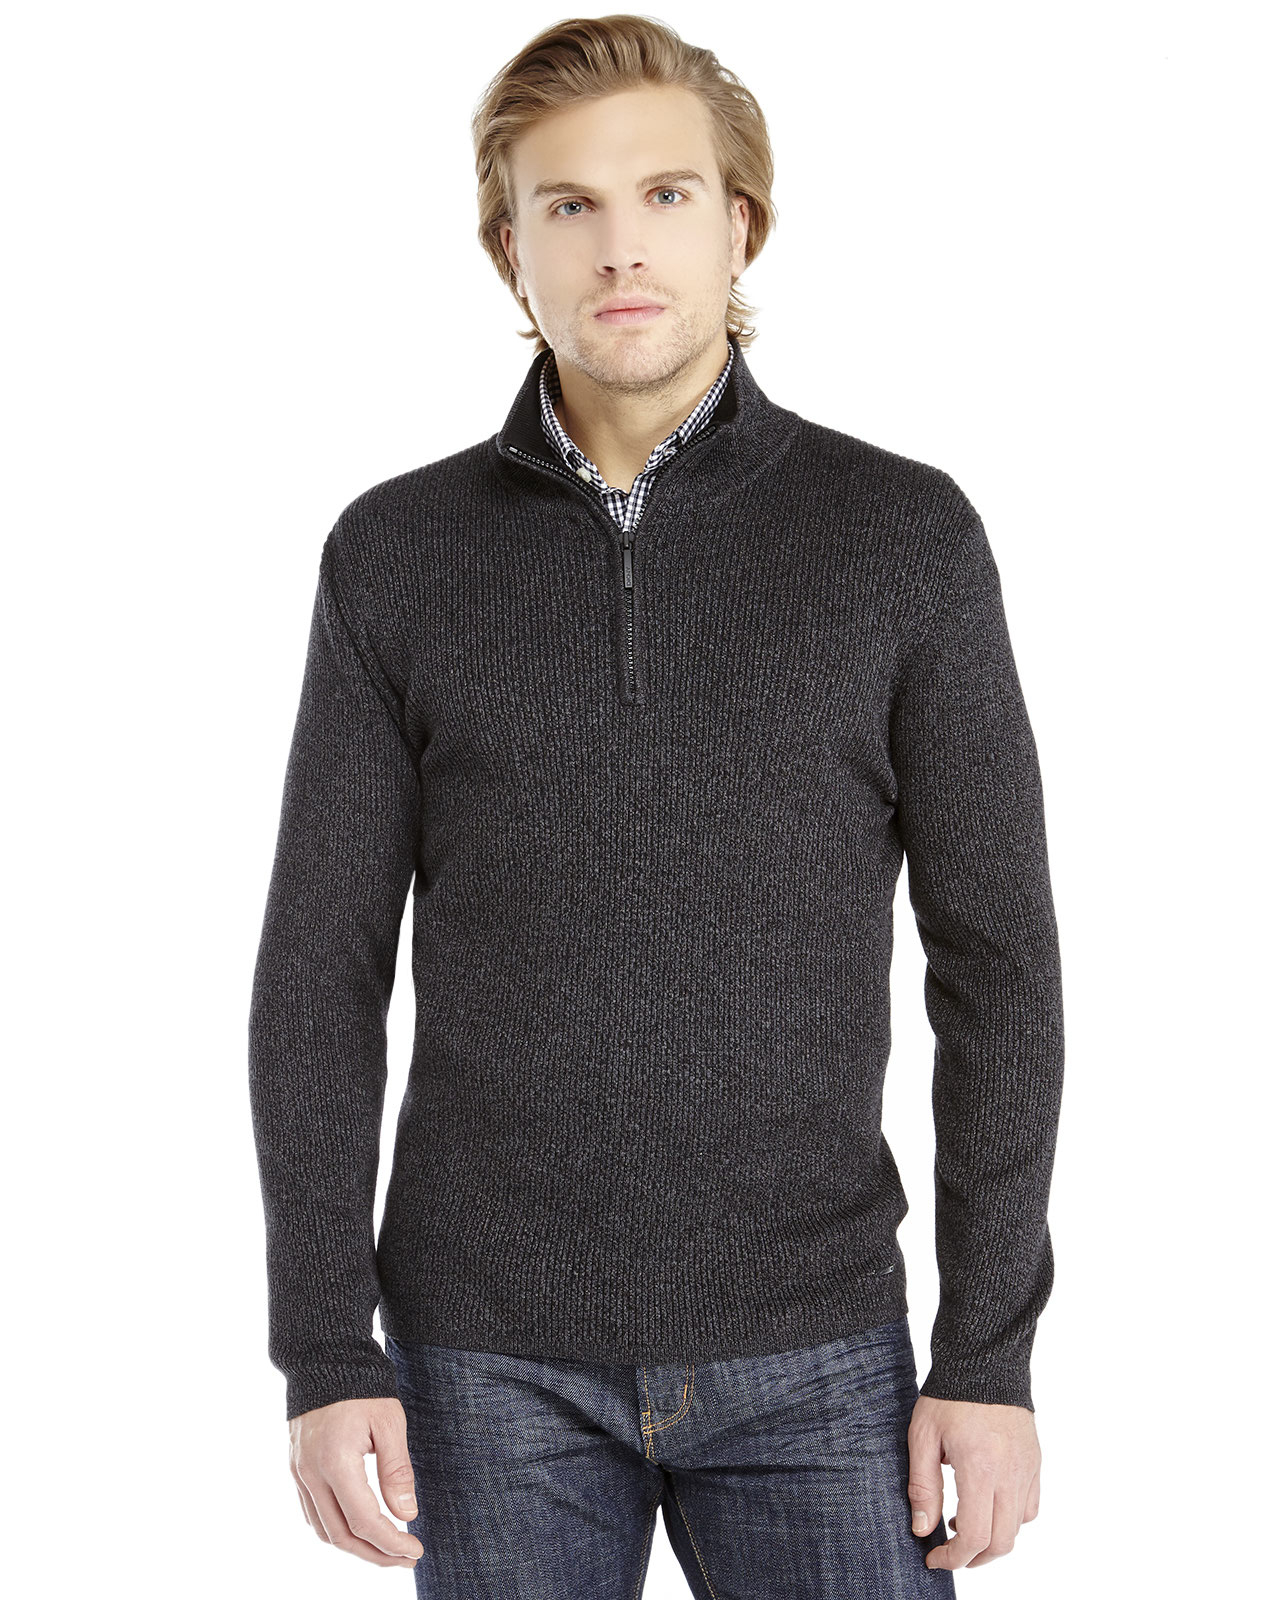 Dkny Marled Knit Quarter-Zip Sweater in Gray for Men (Charcoal) | Lyst